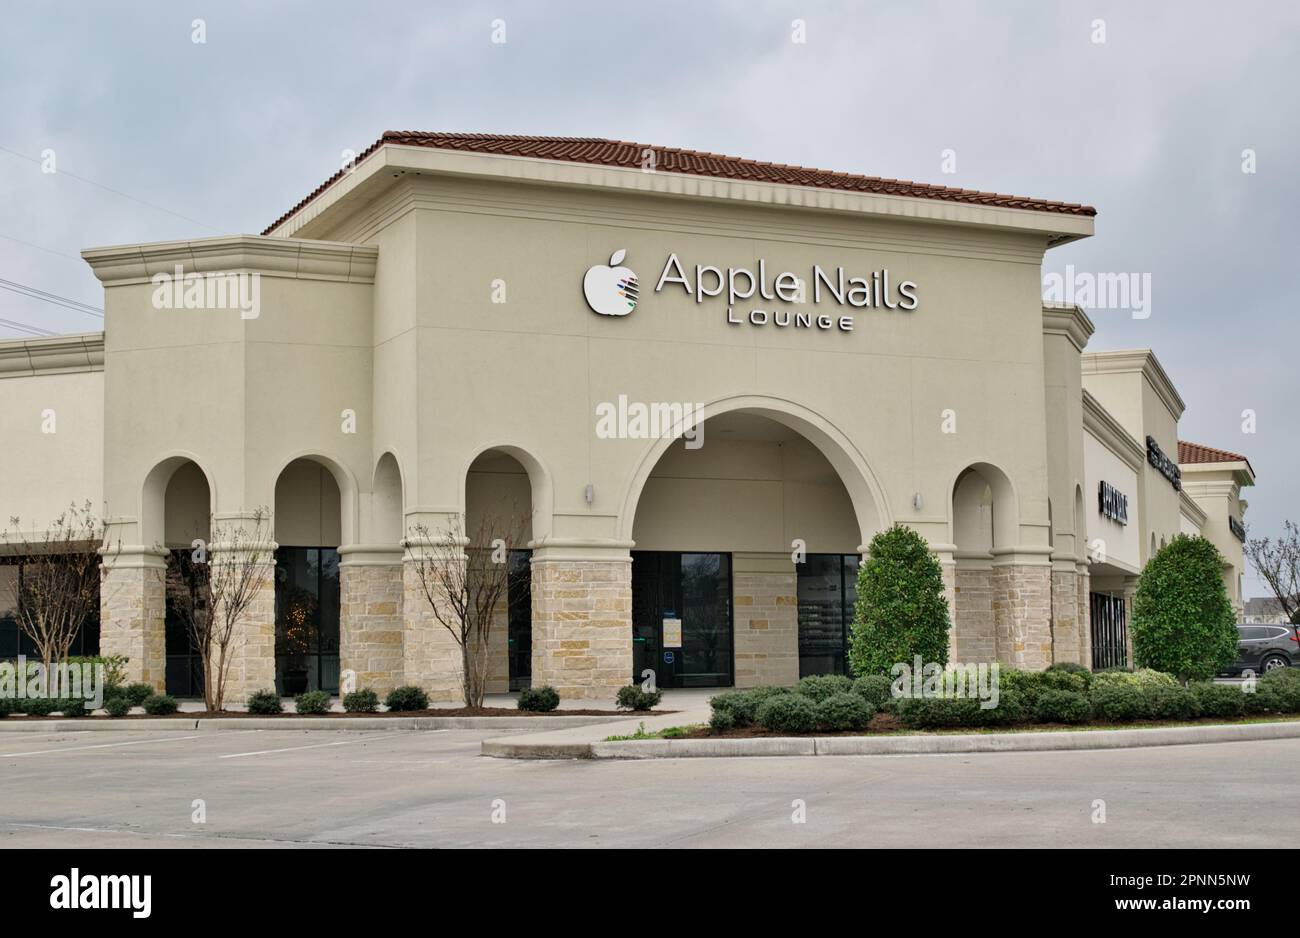 Humble, Texas USA 02-26-2023: Apple Nails Lounge storefront exterior in Humble, TX. Luxury spa and salon local business. Stock Photo